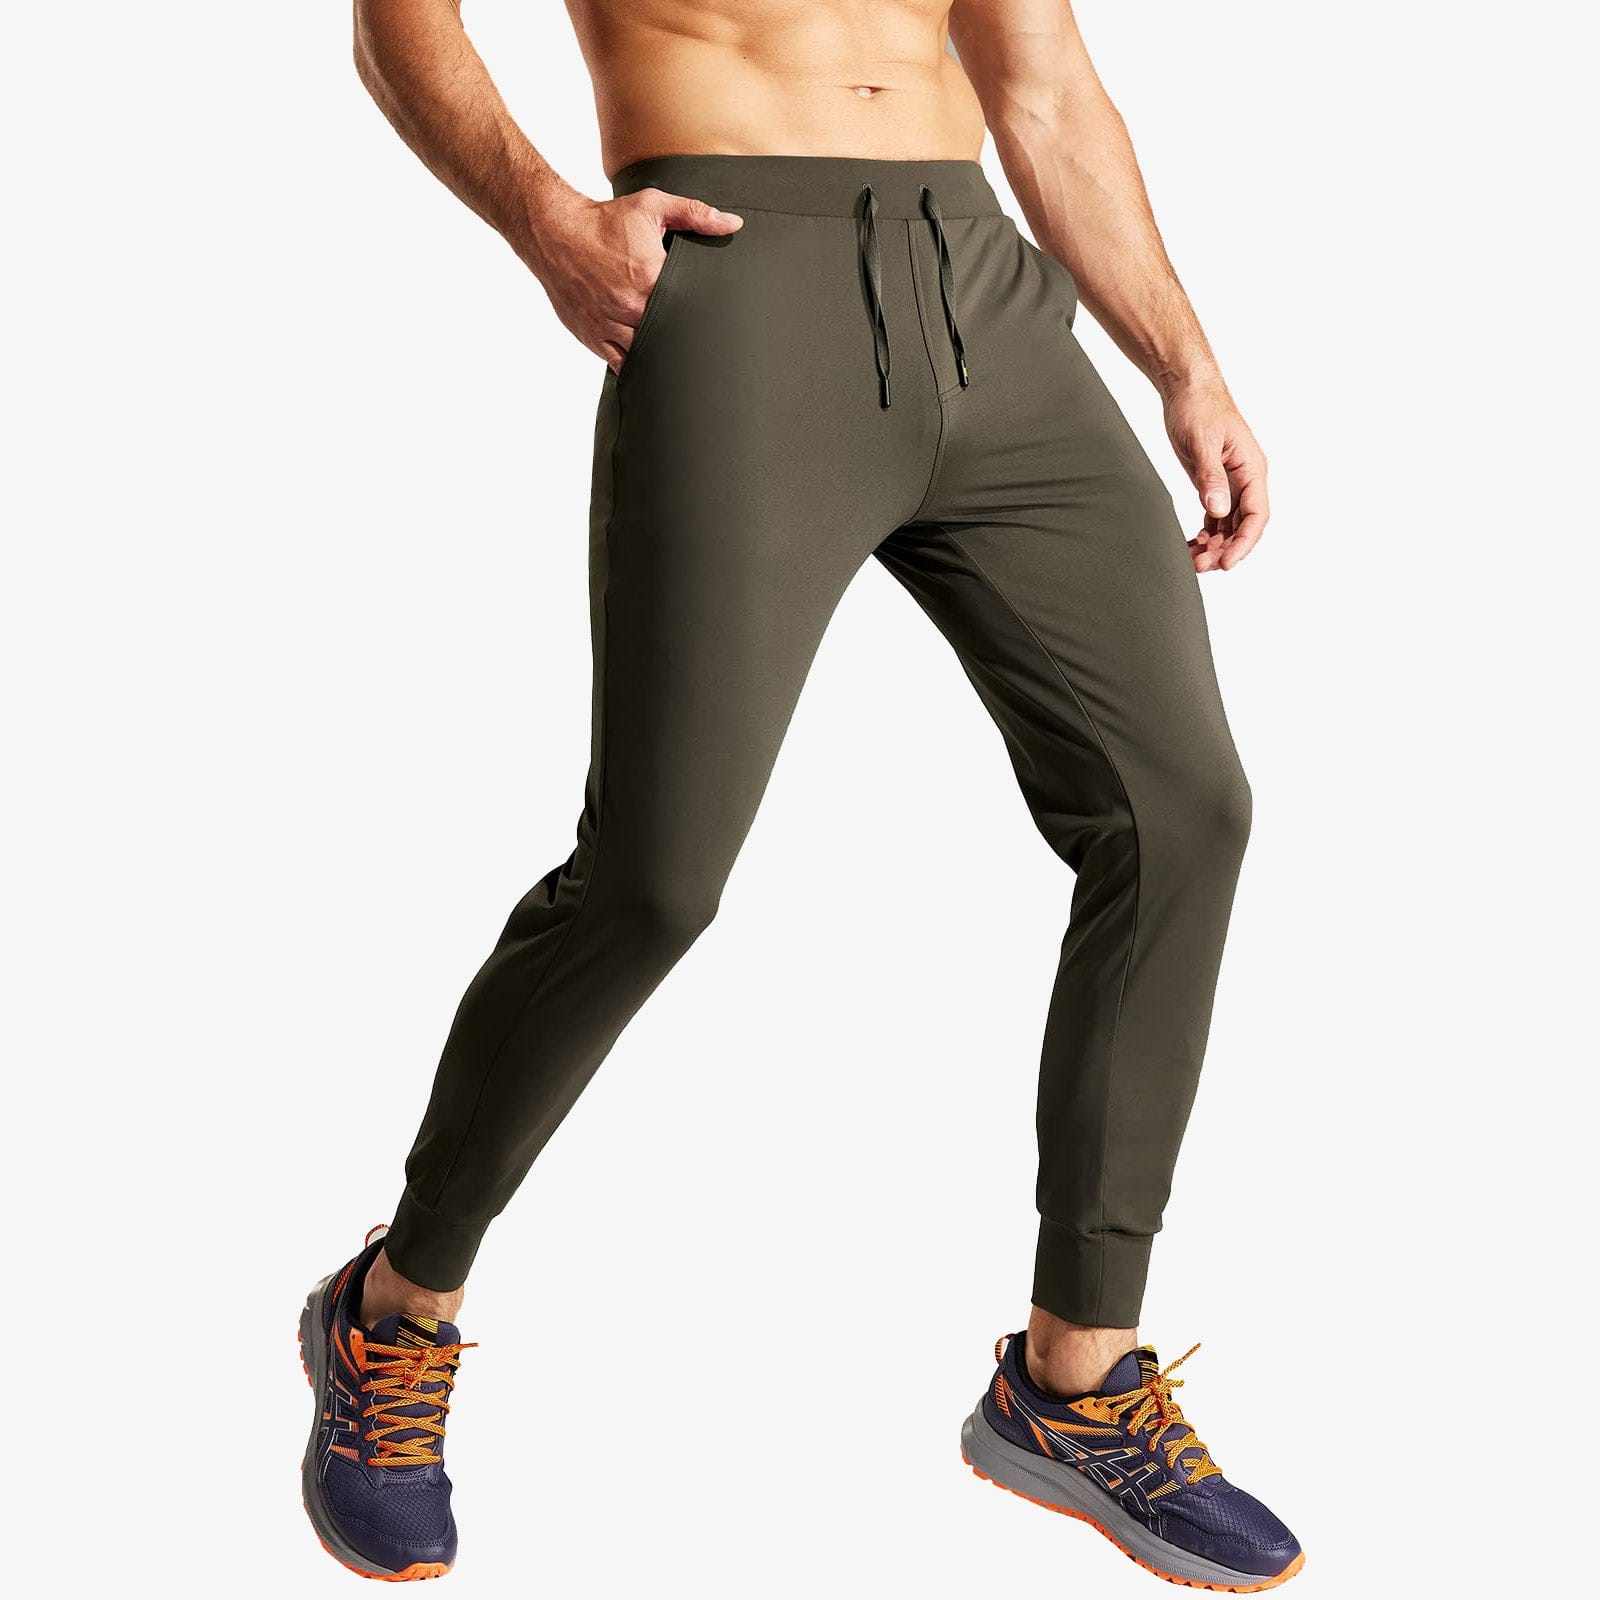 https://www.miersports.com/cdn/shop/products/men-s-jogger-sweatpants-slim-fit-nylon-stretch-athletic-track-pants-olive-green-s-mier-31307126210694.jpg?v=1697613613